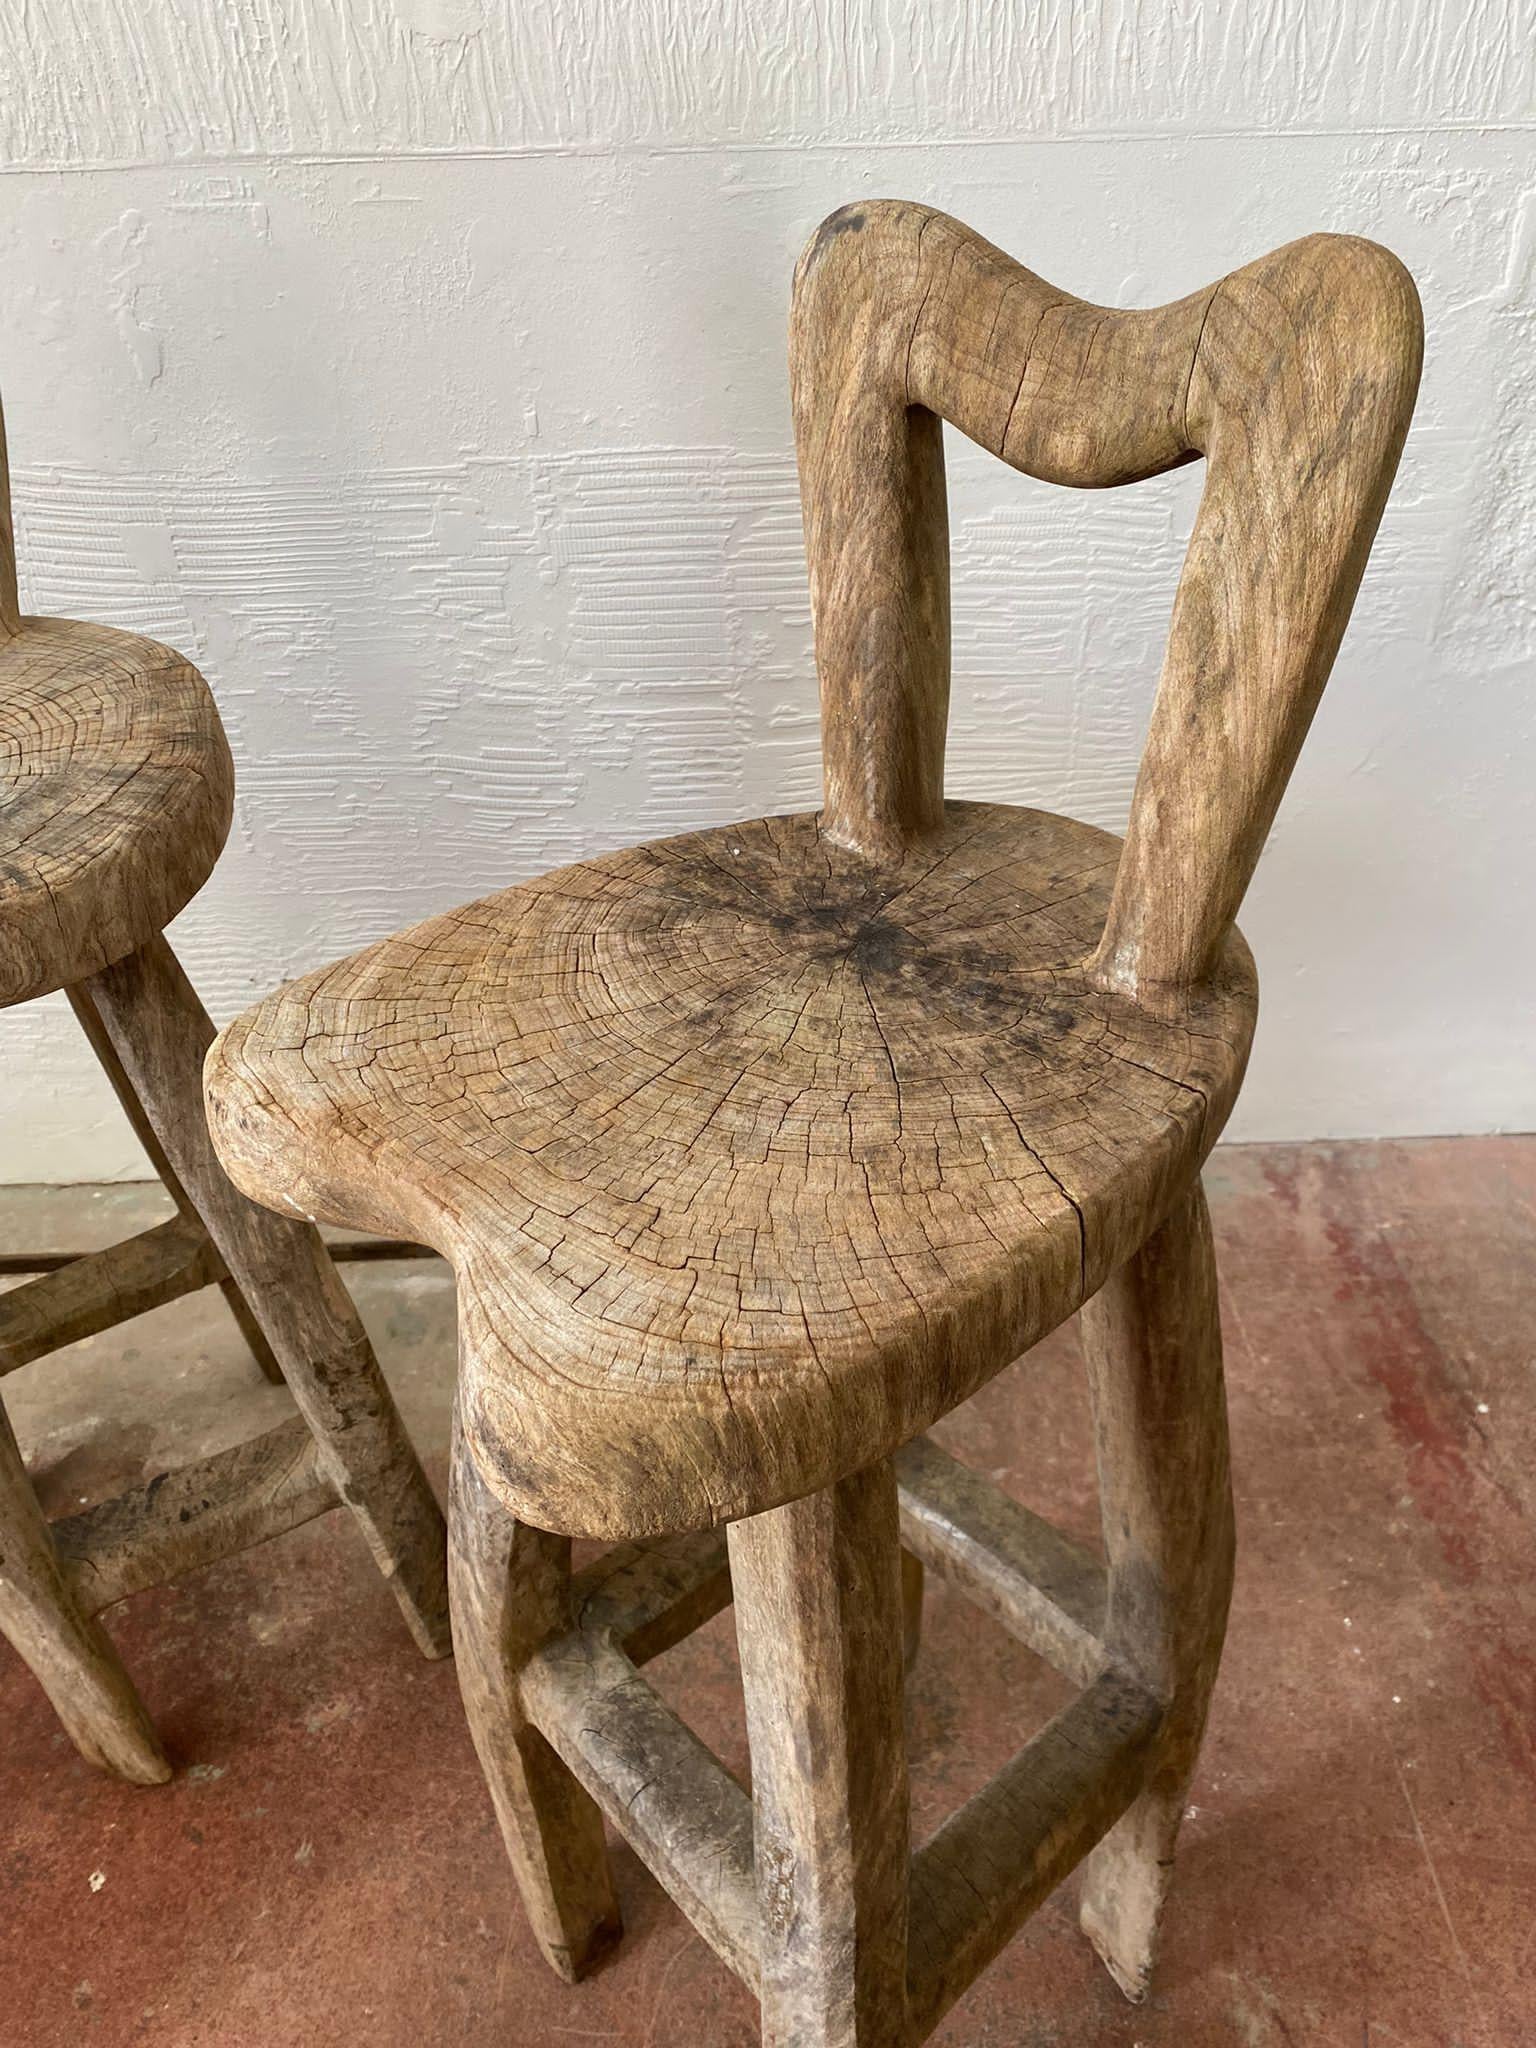 A pair of sculptural stools made by the artist Maxie Lane. Carved out of one piece of wood, they are unique and rustic.
The stools are tall perching seats. The raw and open wood finish are light, neutral and natural in appearance. They are wonky,